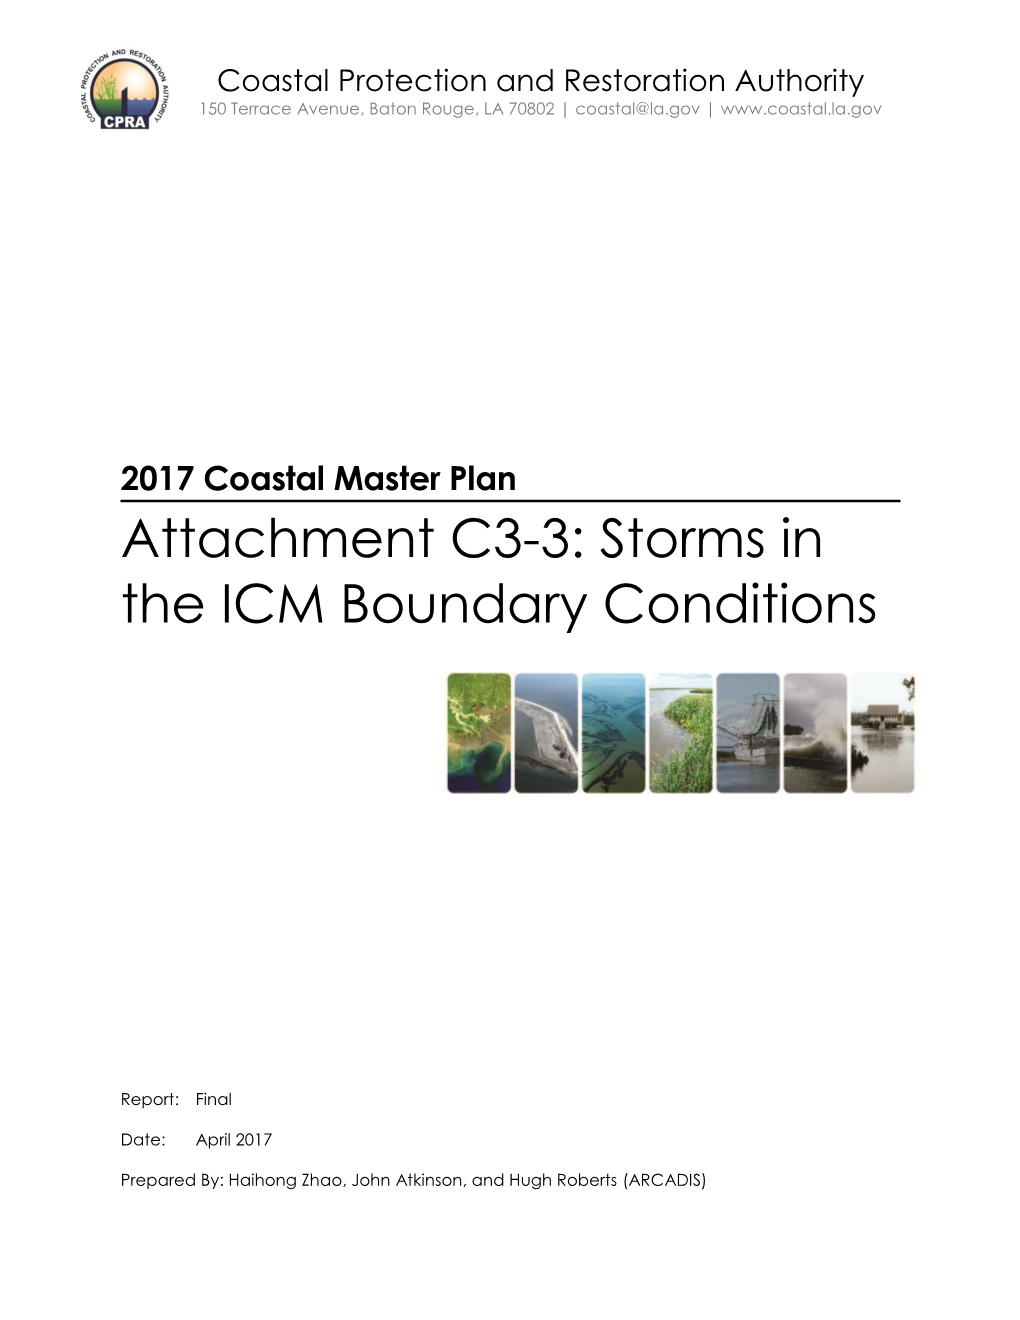 Storms in the ICM Boundary Conditions